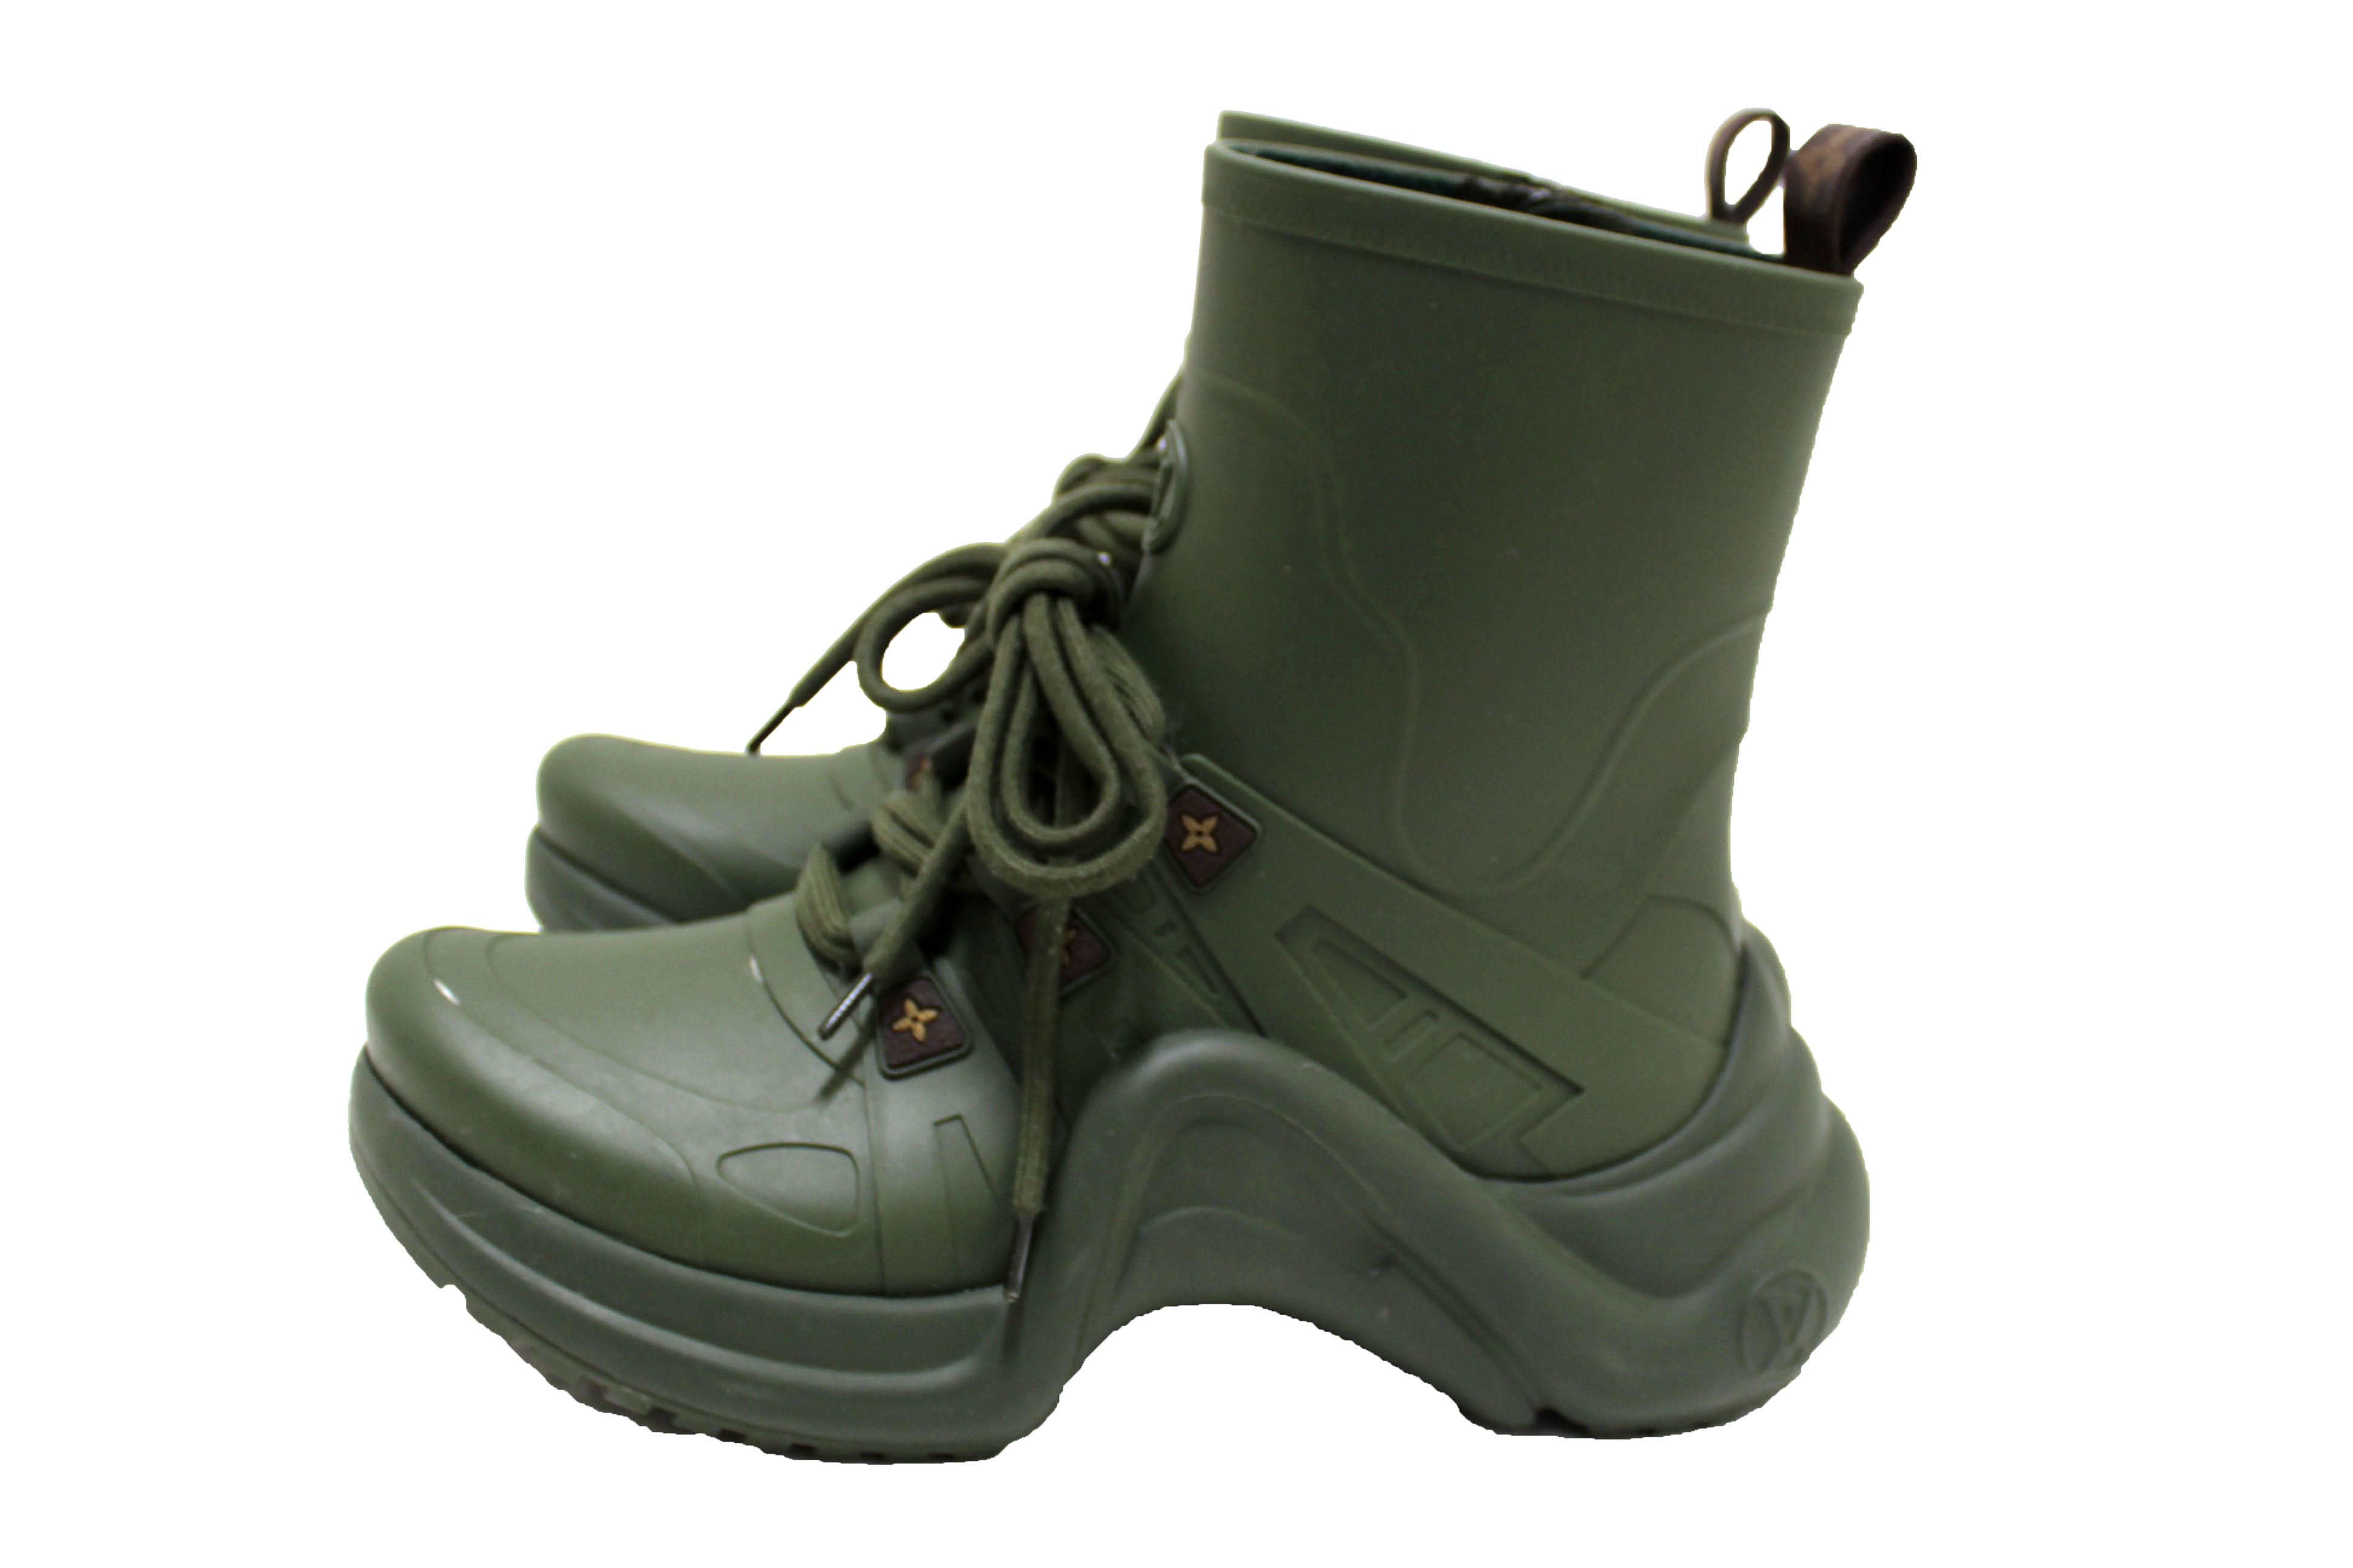 Louis Vuitton - Authenticated Archlight Boots - Rubber Green Plain For Woman, Very Good condition